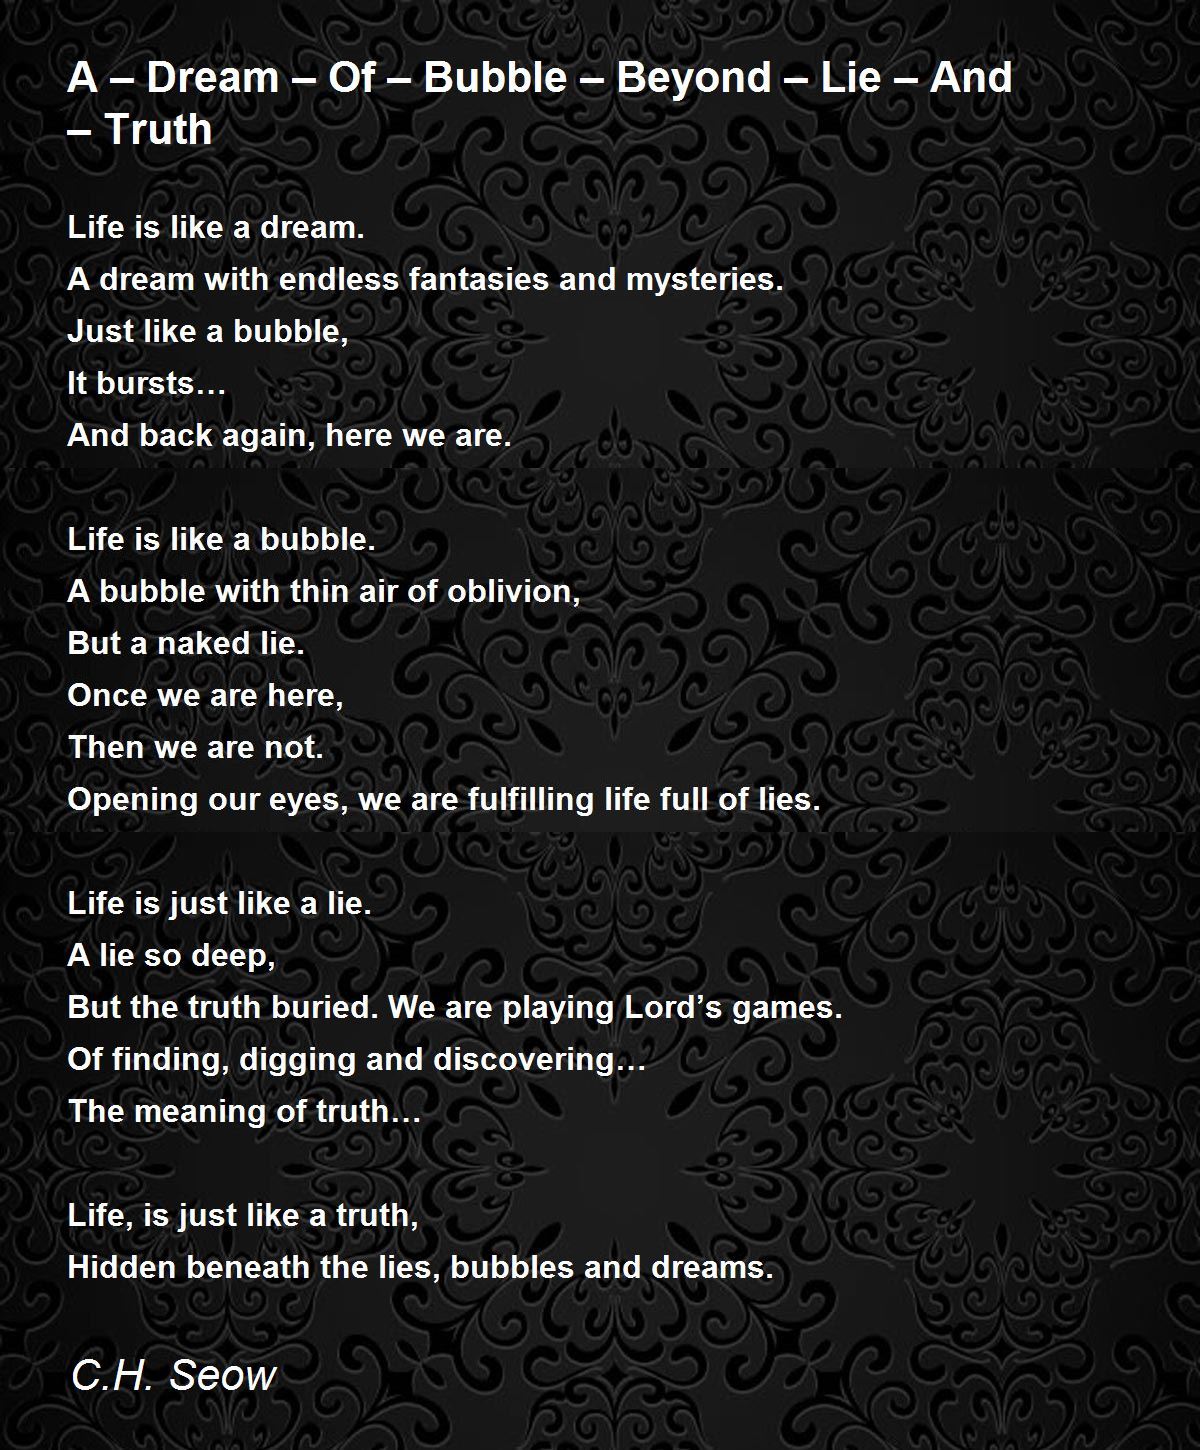 A Dream Of Bubble Beyond Lie And Truth By C H Seow A Dream Of Bubble Beyond Lie And Truth Poem